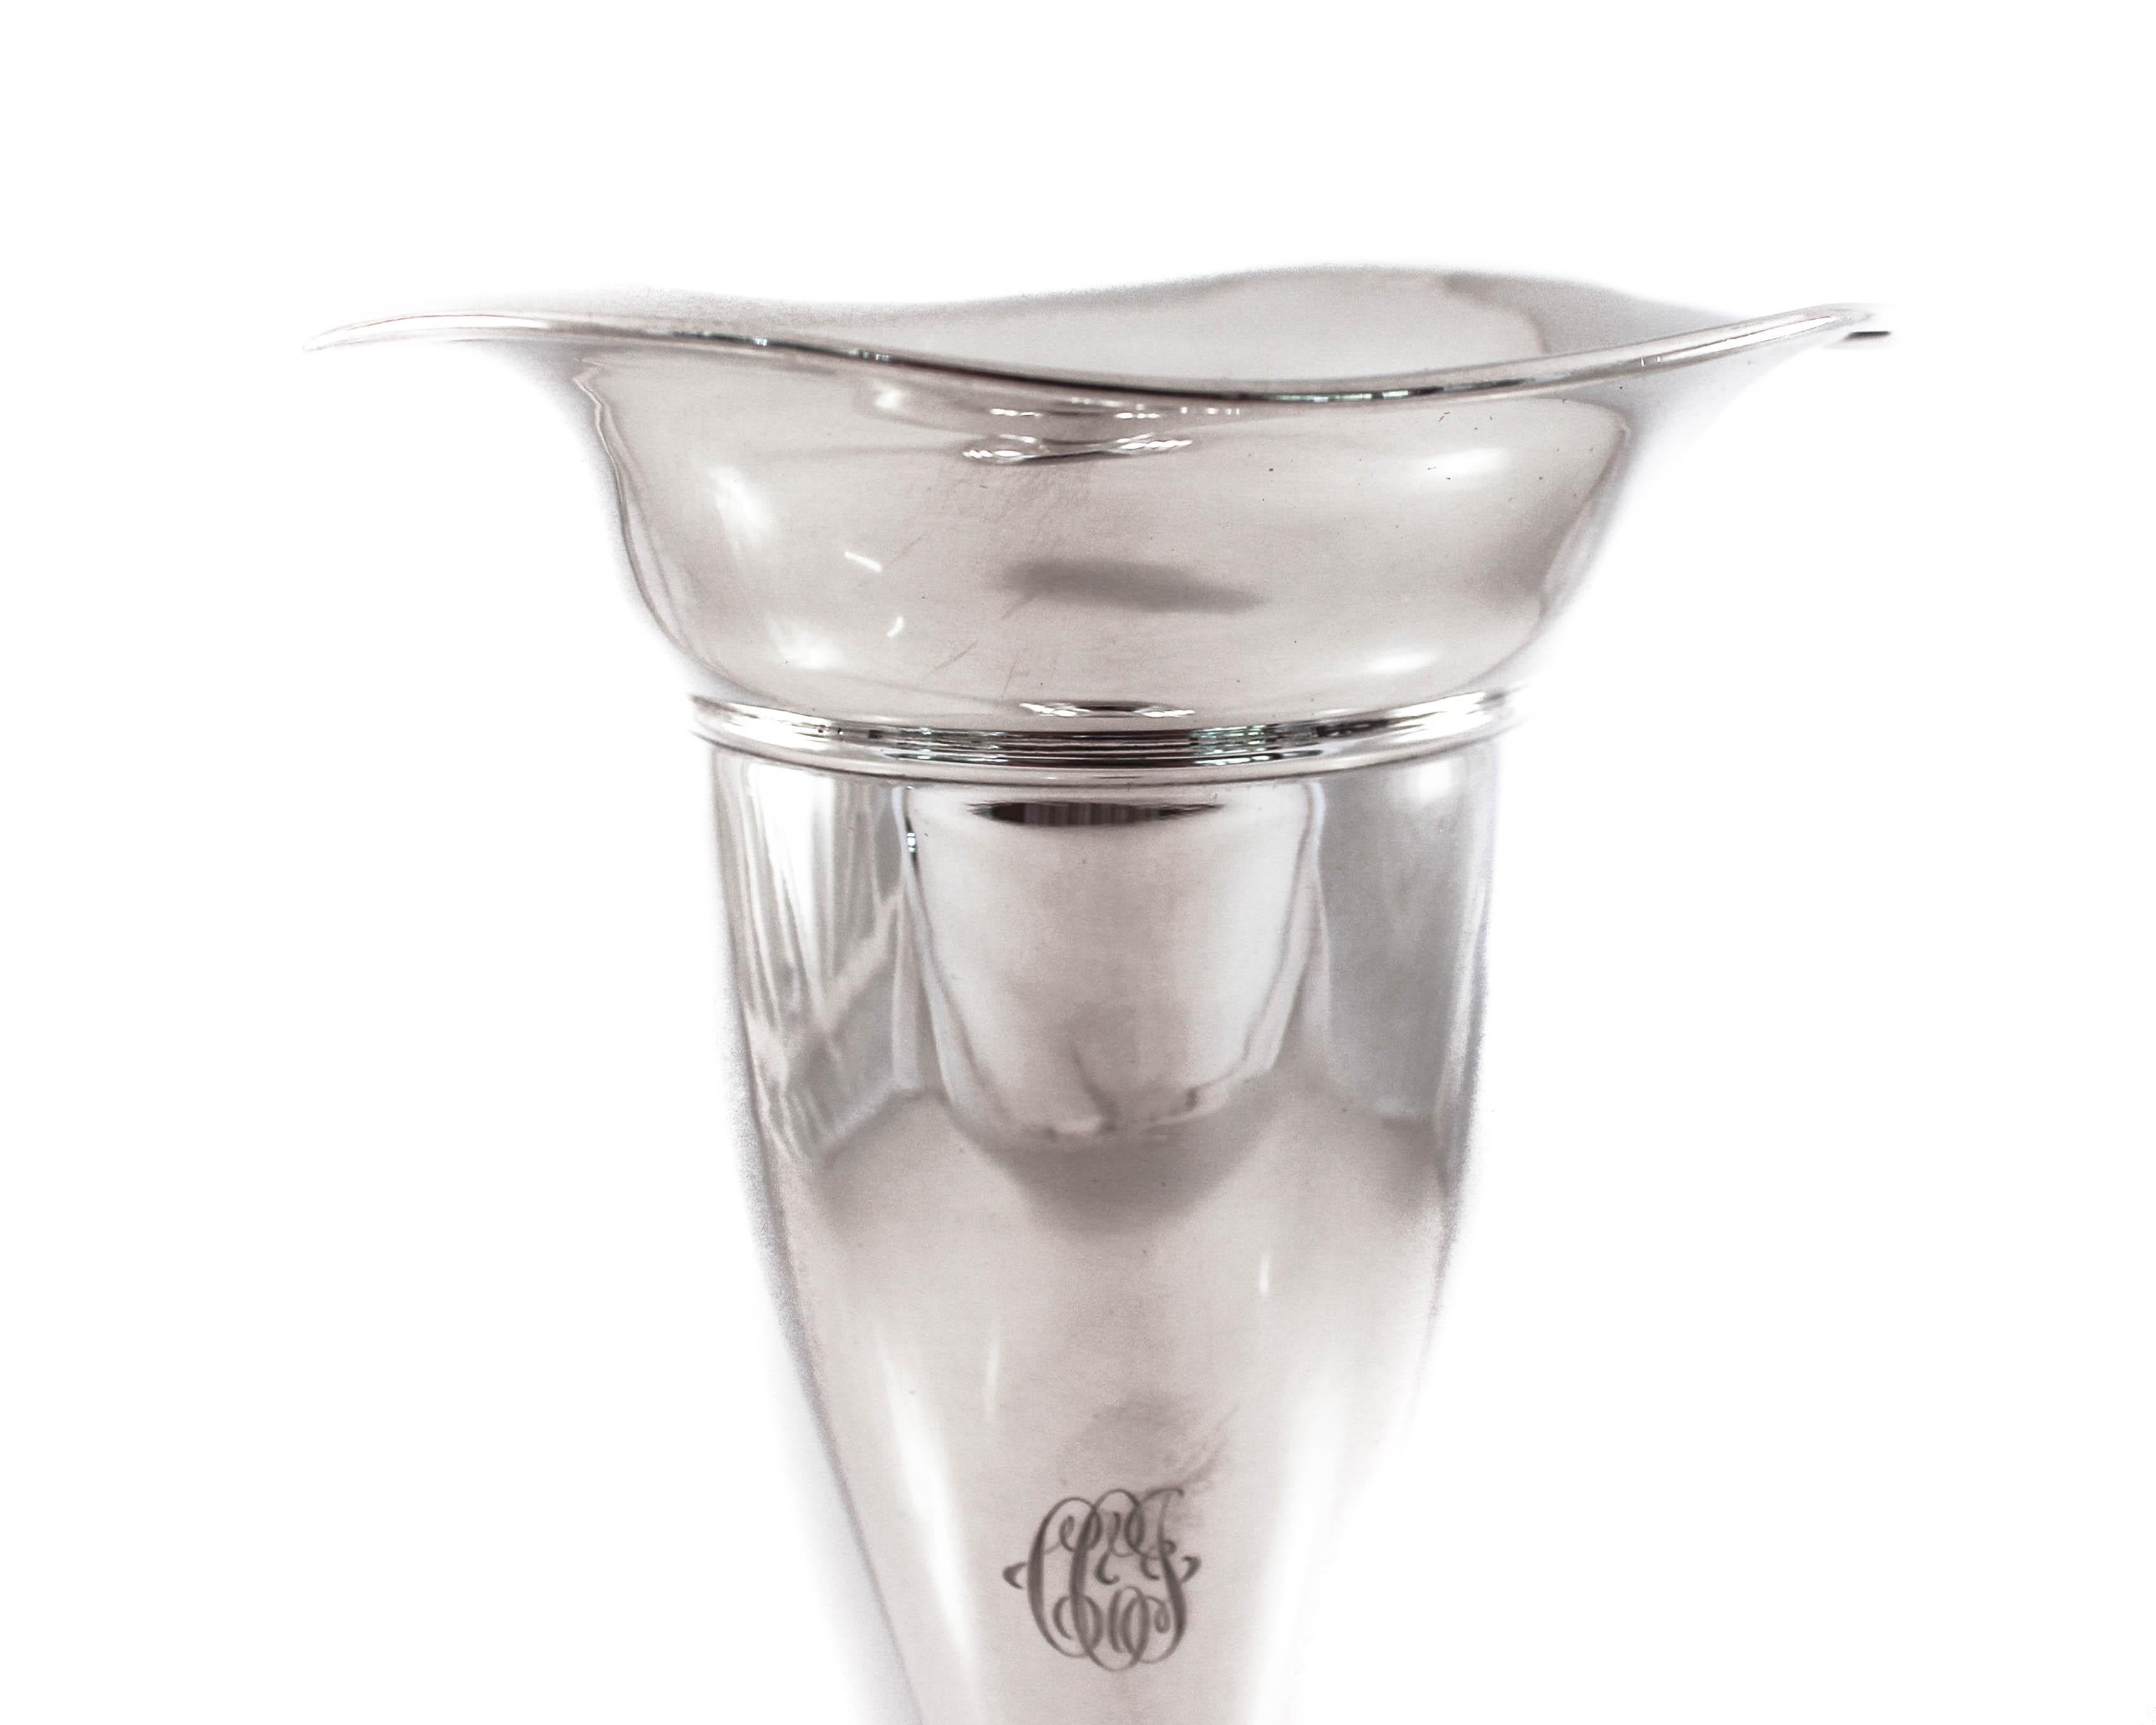 We are delighted to offer this sterling silver vase by J.F. Fradley & Company of New York. Manufactured in the early part of the 20th century, it was ahead of its time in that it was not heavily decorated. It has a very simple yet elegant shape; it